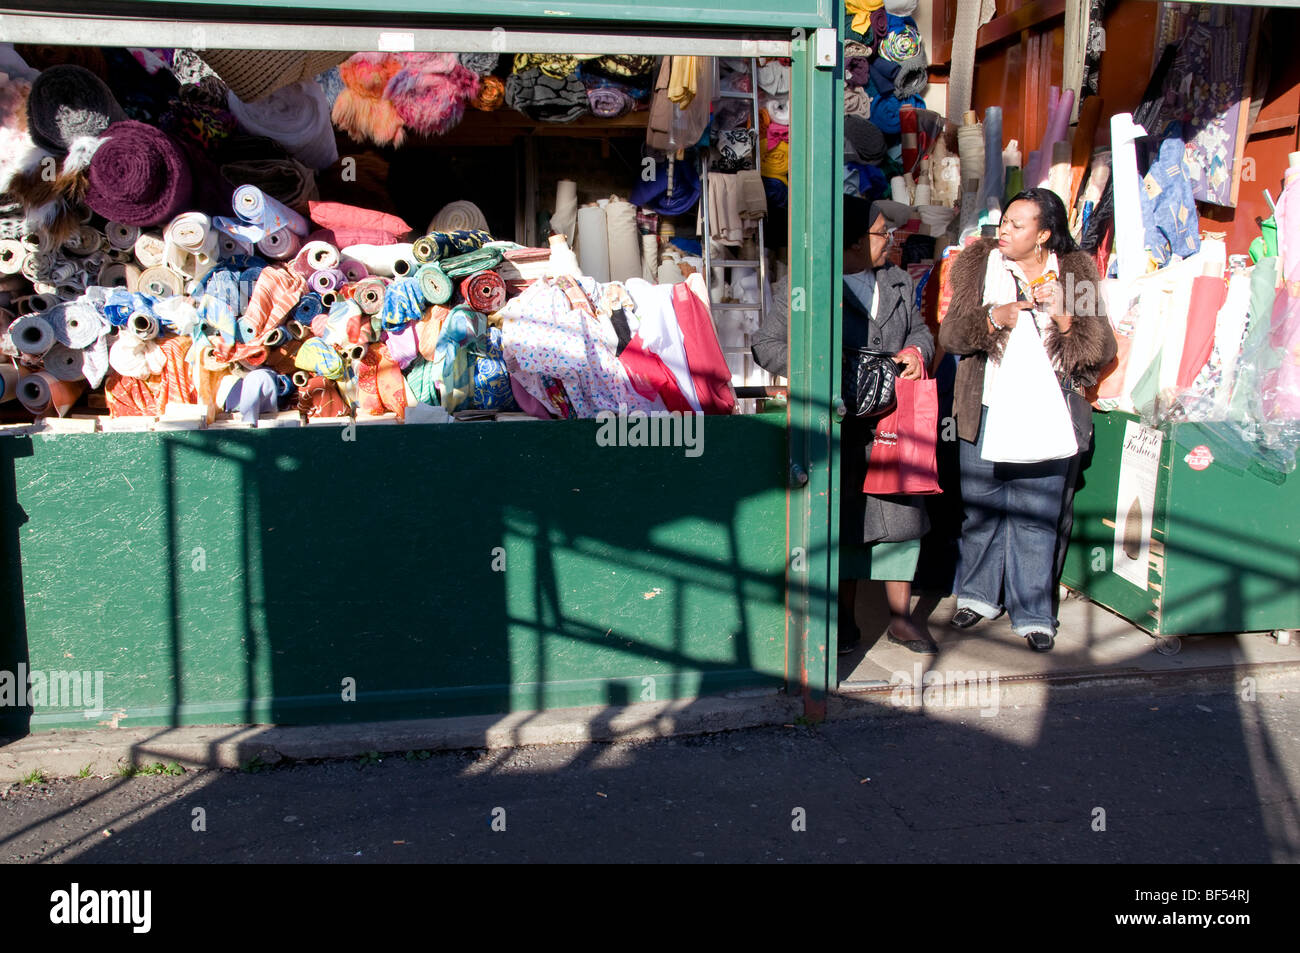 UK.Afro Caribbean textile and cloth shop in Ridley Rd. market,Hackney London Photo Julio Etchart Stock Photo